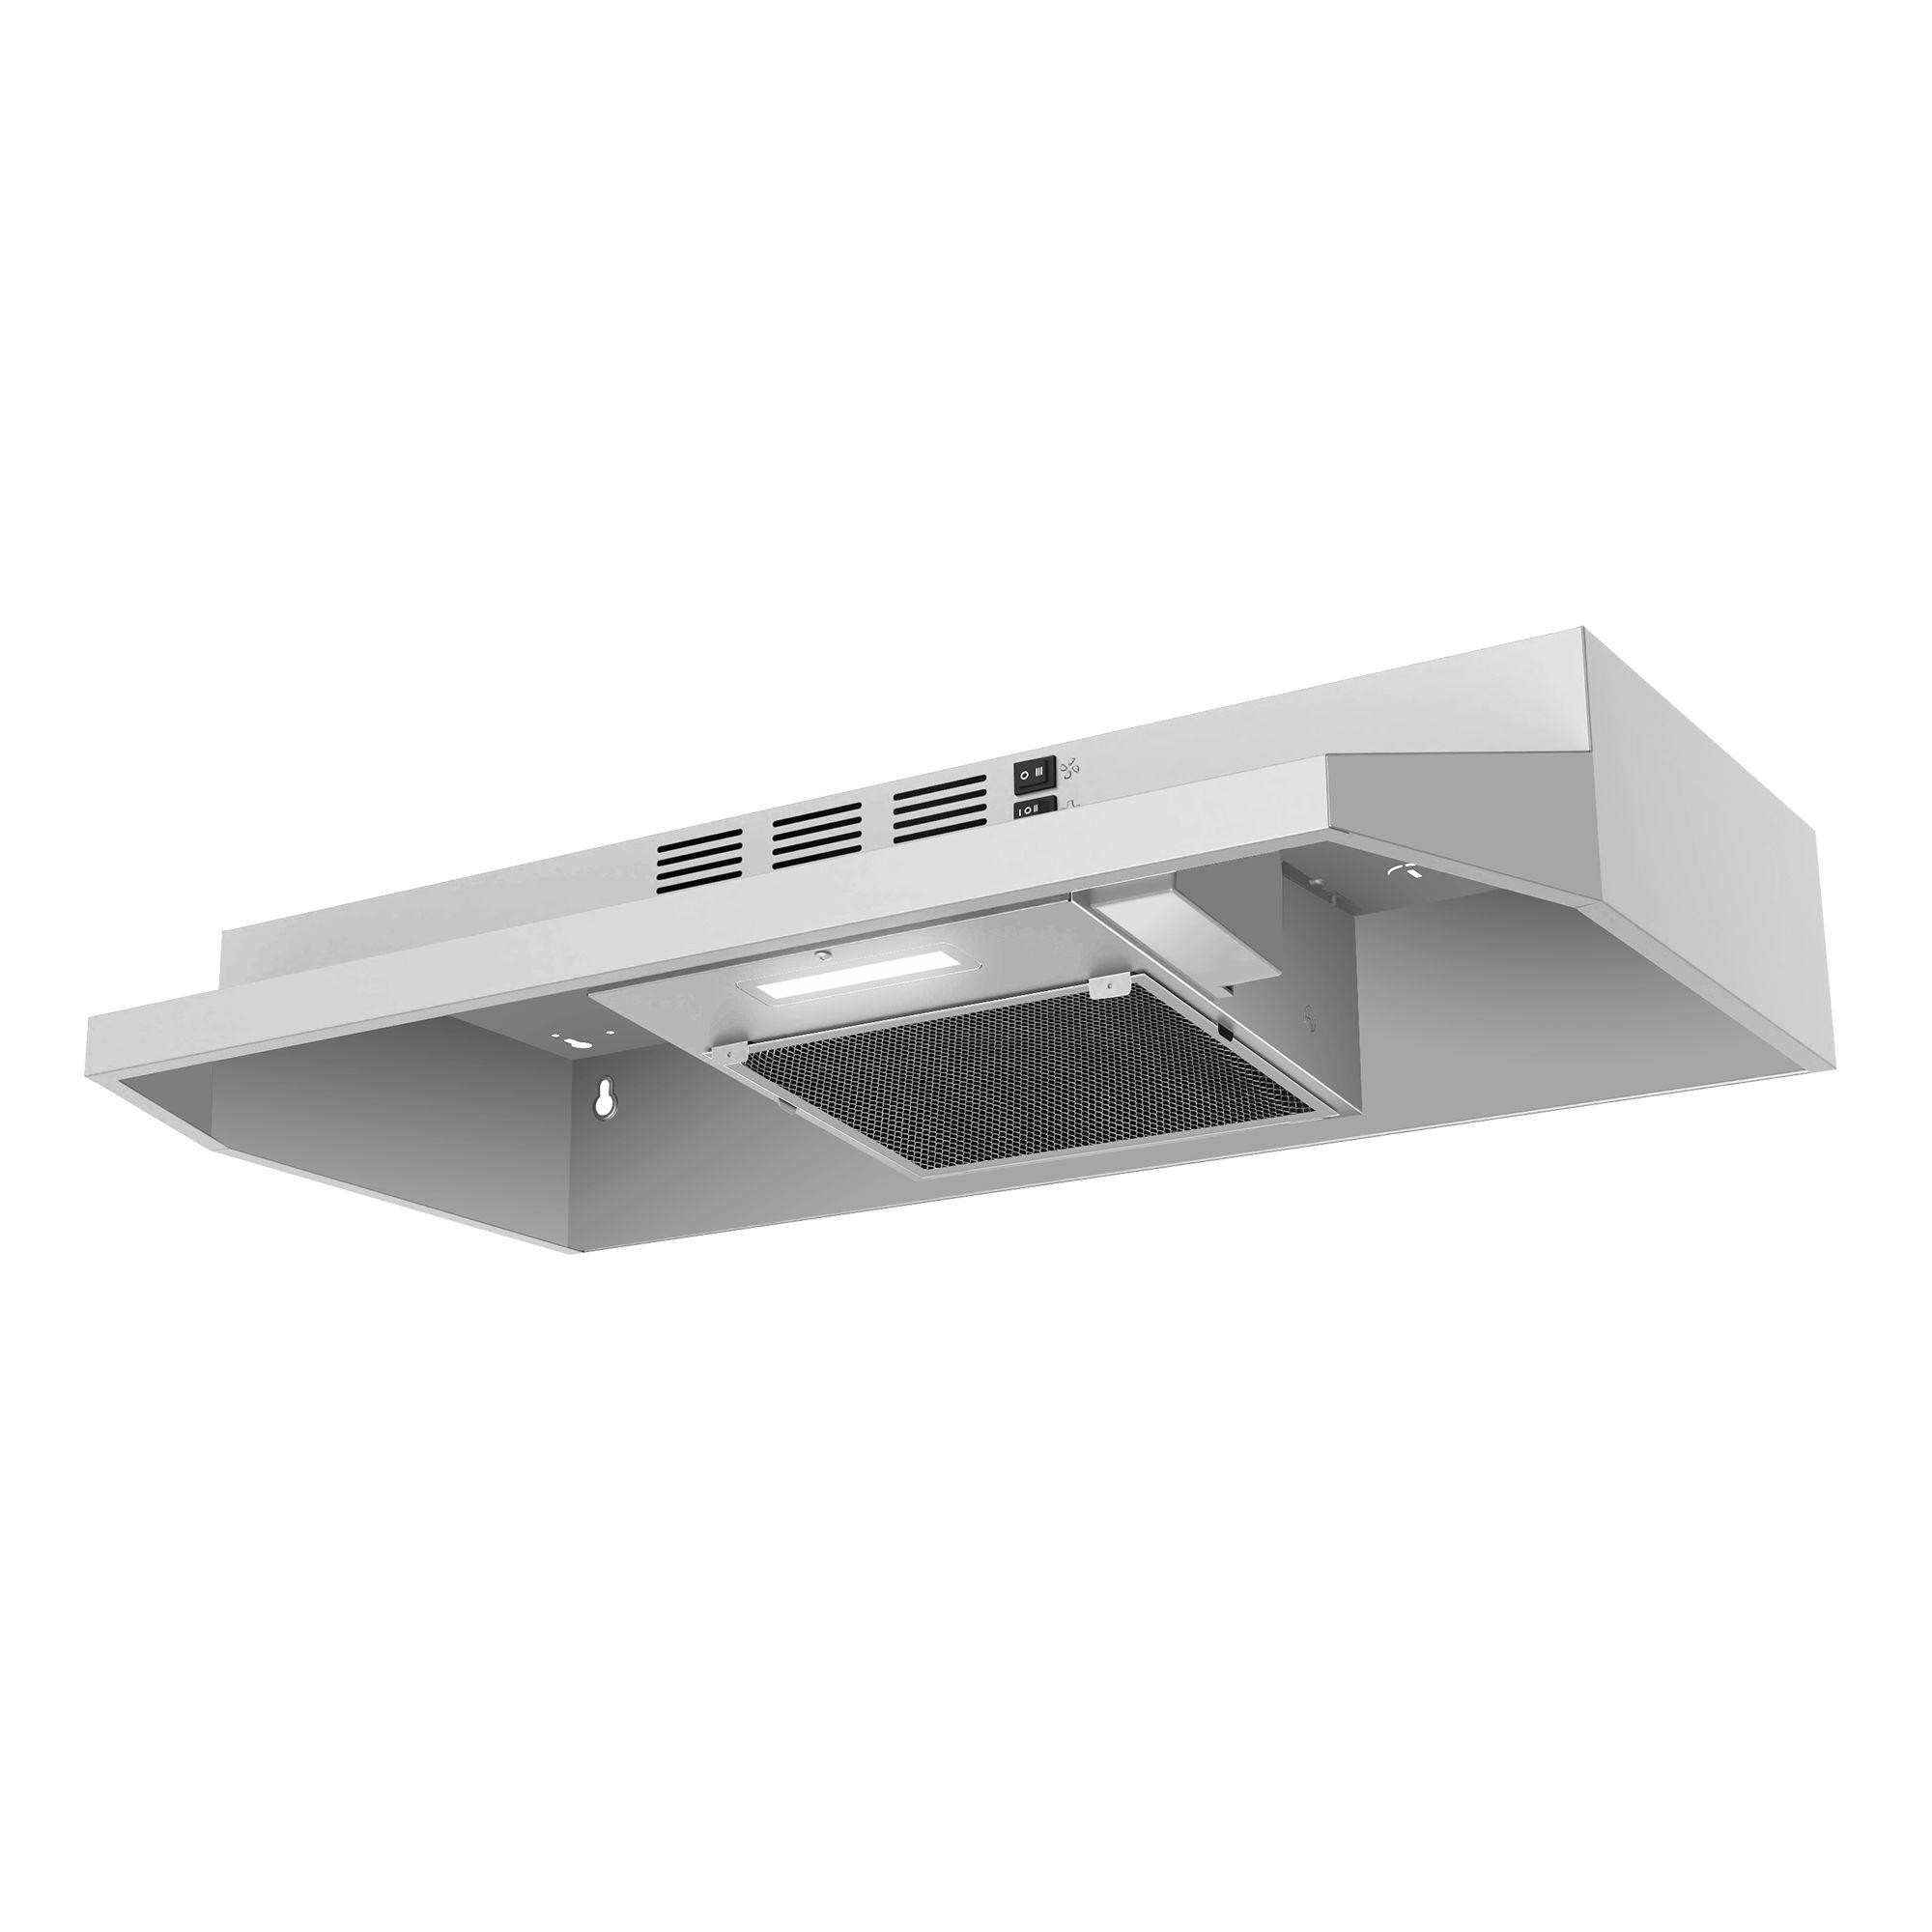  Range Hood 30 Inch, IsEasy Under Cabinet Range Hood,  Ducted/Ductless Convertible, Kitchen Vent Hood 30 Inch with 3-Speed Exhaust  Fan, Stainless Steel, Reusable Filters, LED Light and Charcoal Filter :  Appliances